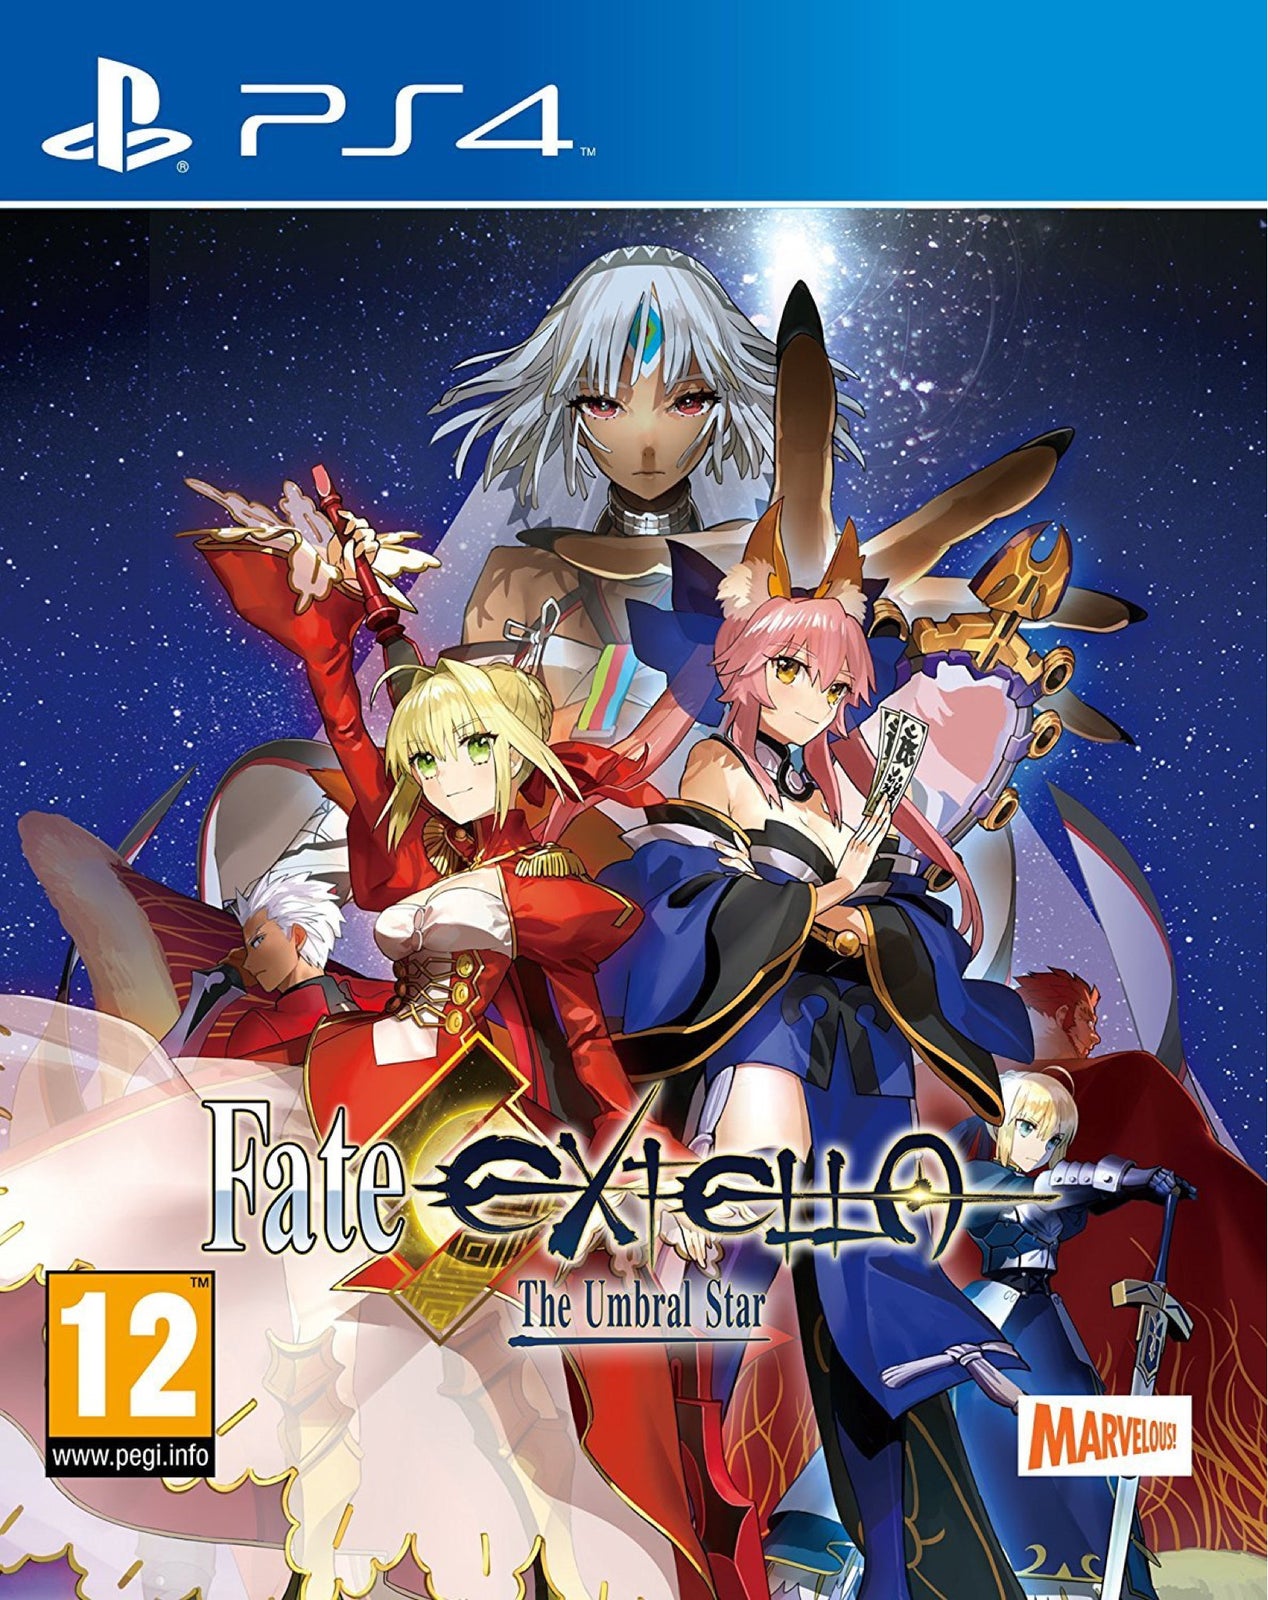 Fate/Extella: The Umbral Star til PS4, PS4, adventure